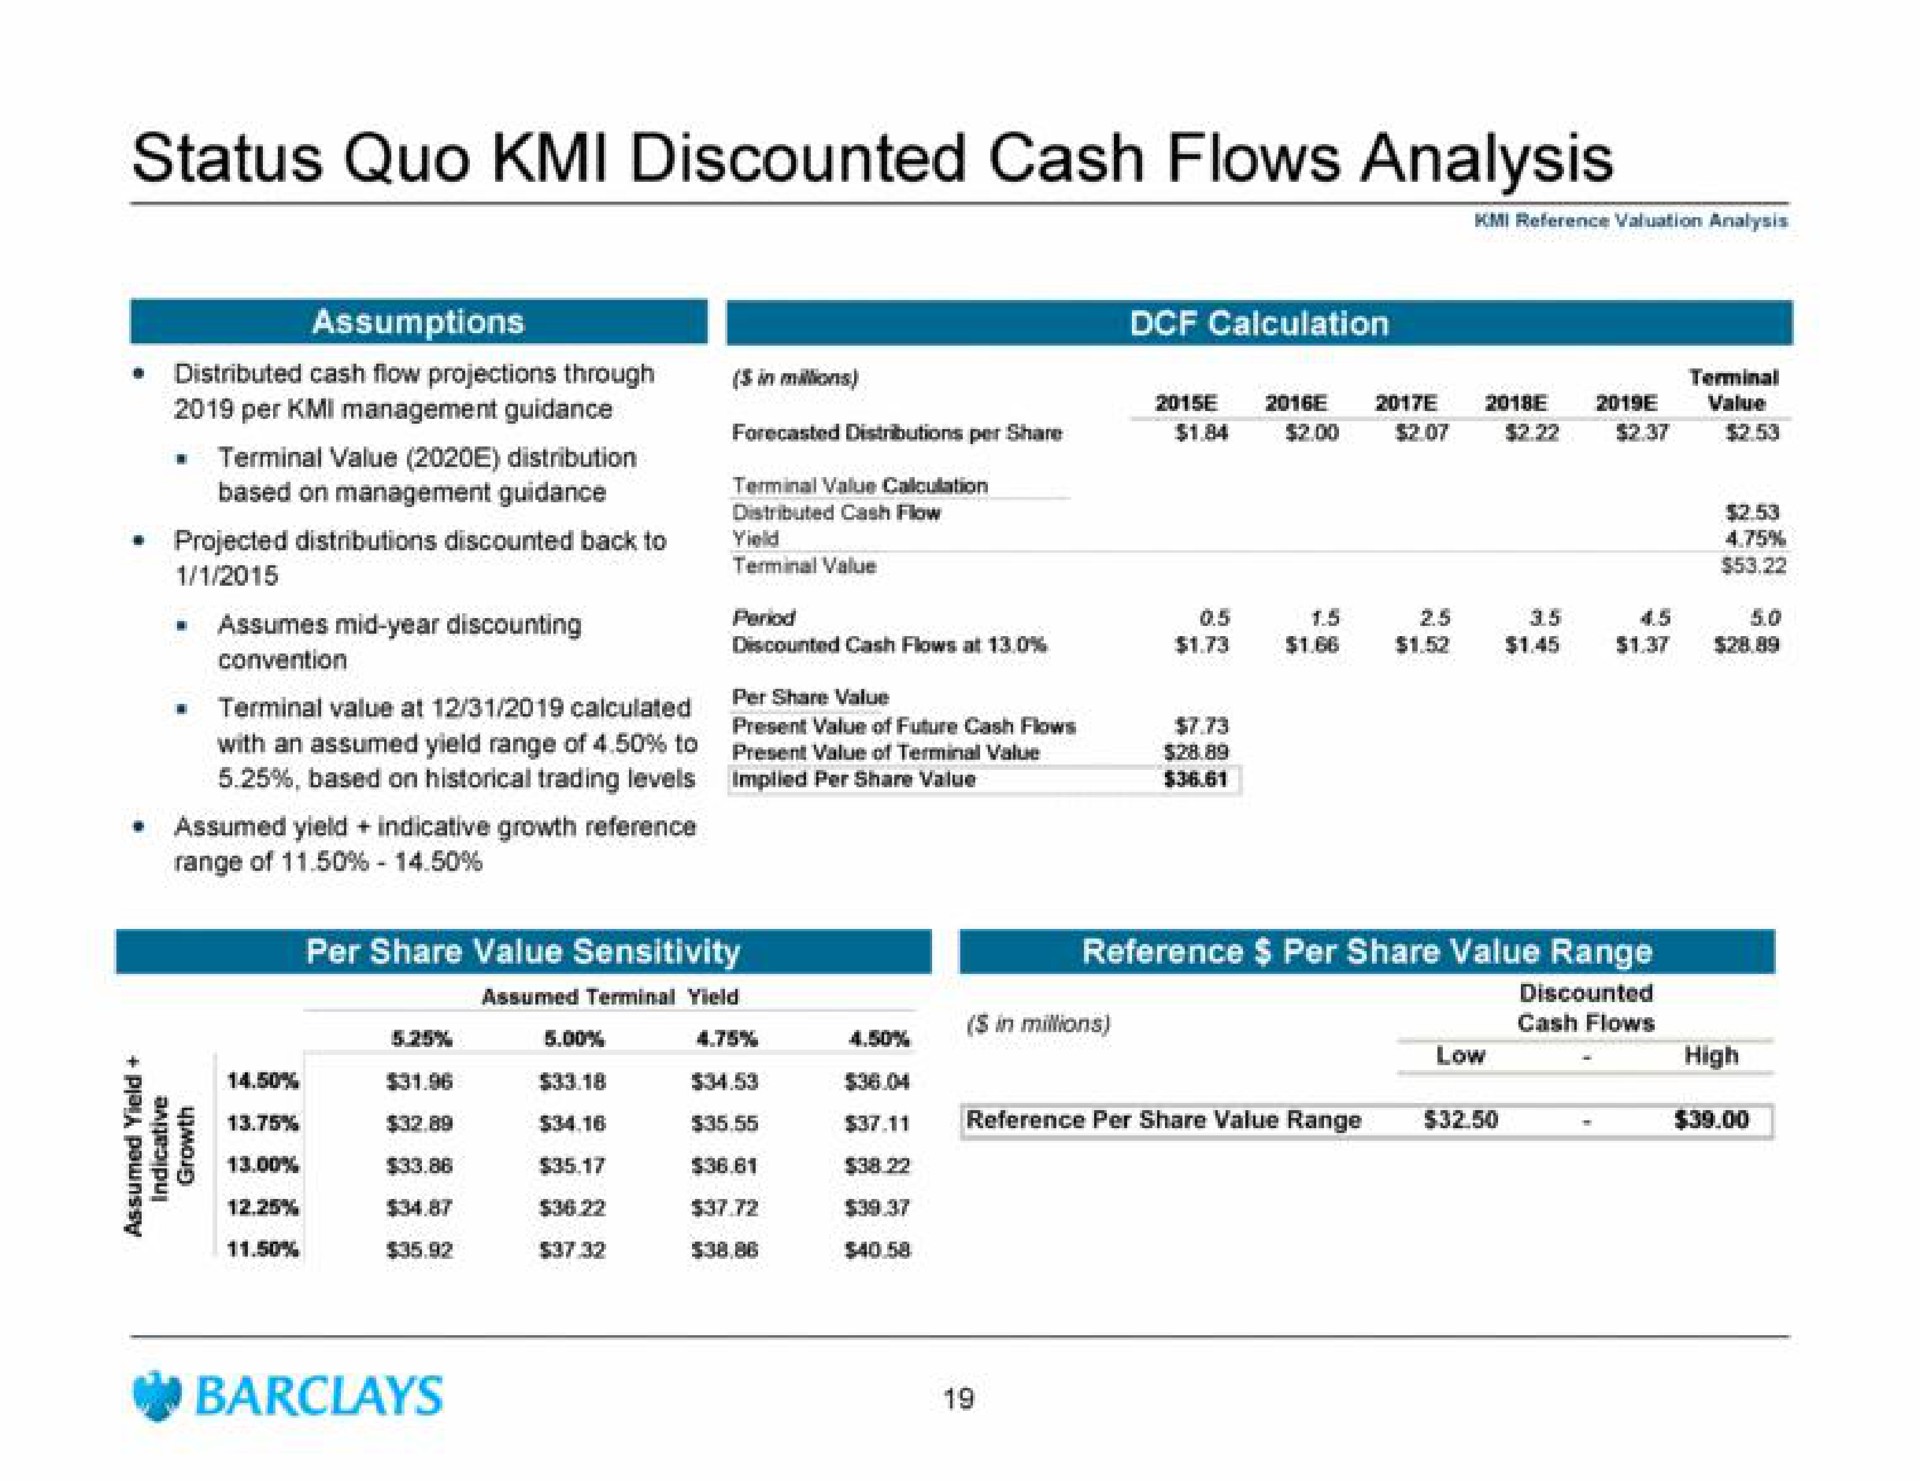 status quo discounted cash flows analysis | Barclays